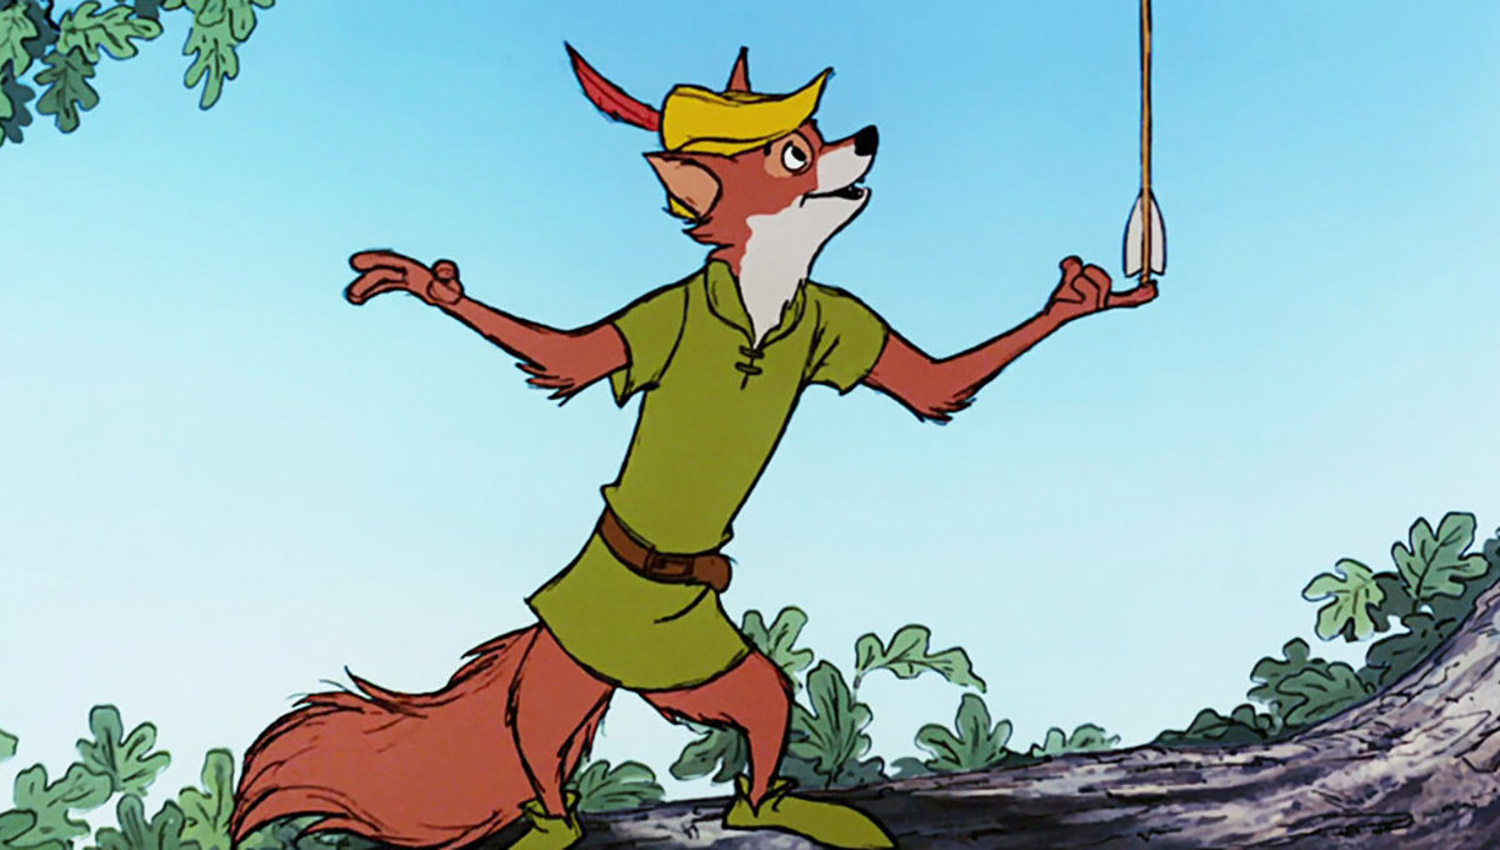 Disney Announces Plans To Bring Remake Of 1973 Robin Hood To Disney+